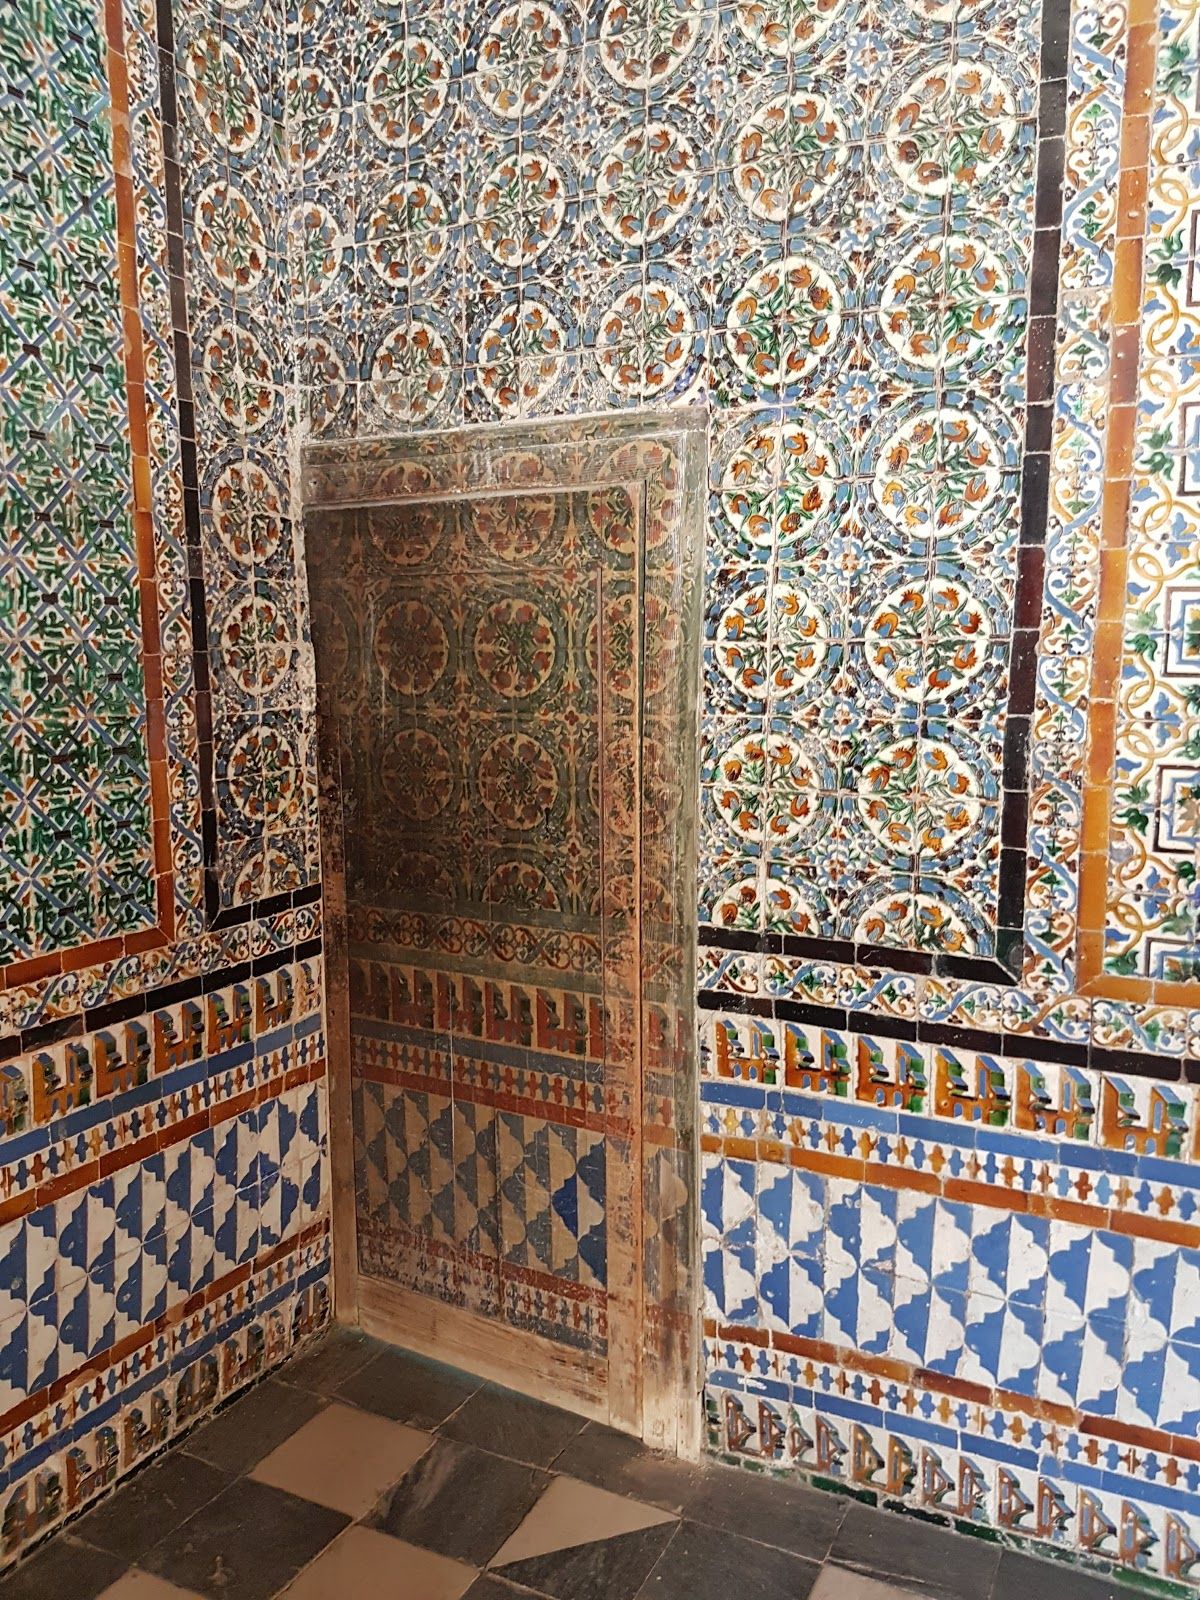 In a richly-tiled room corner, a wooden door is painted to look like the surrounding tile work, although age has darkened it to be more obvious.